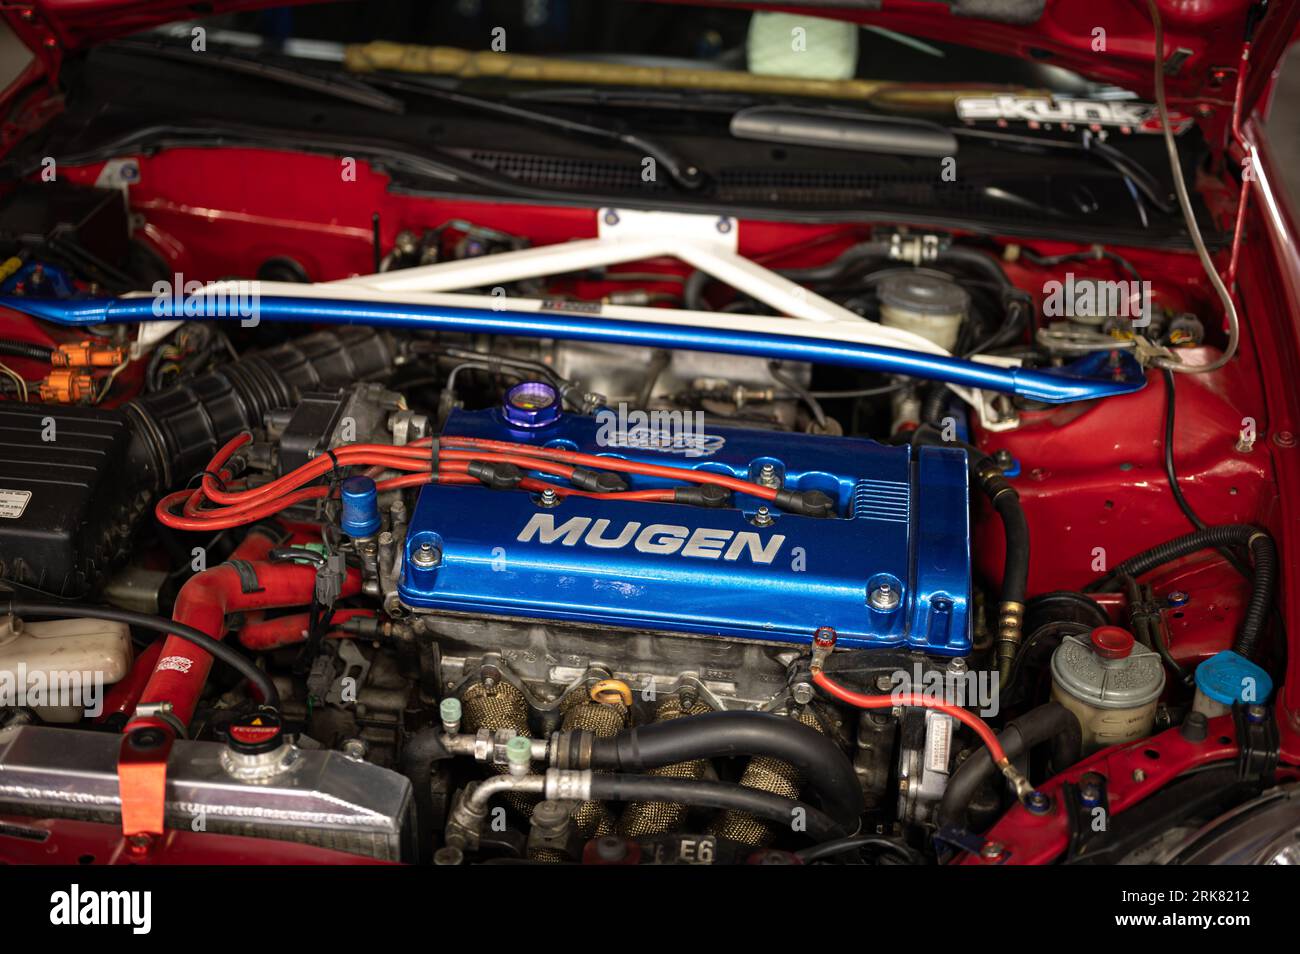 Detail of the modified Mugen engine of the red Honda CR-X Del Sol parked in the parking lot Stock Photo